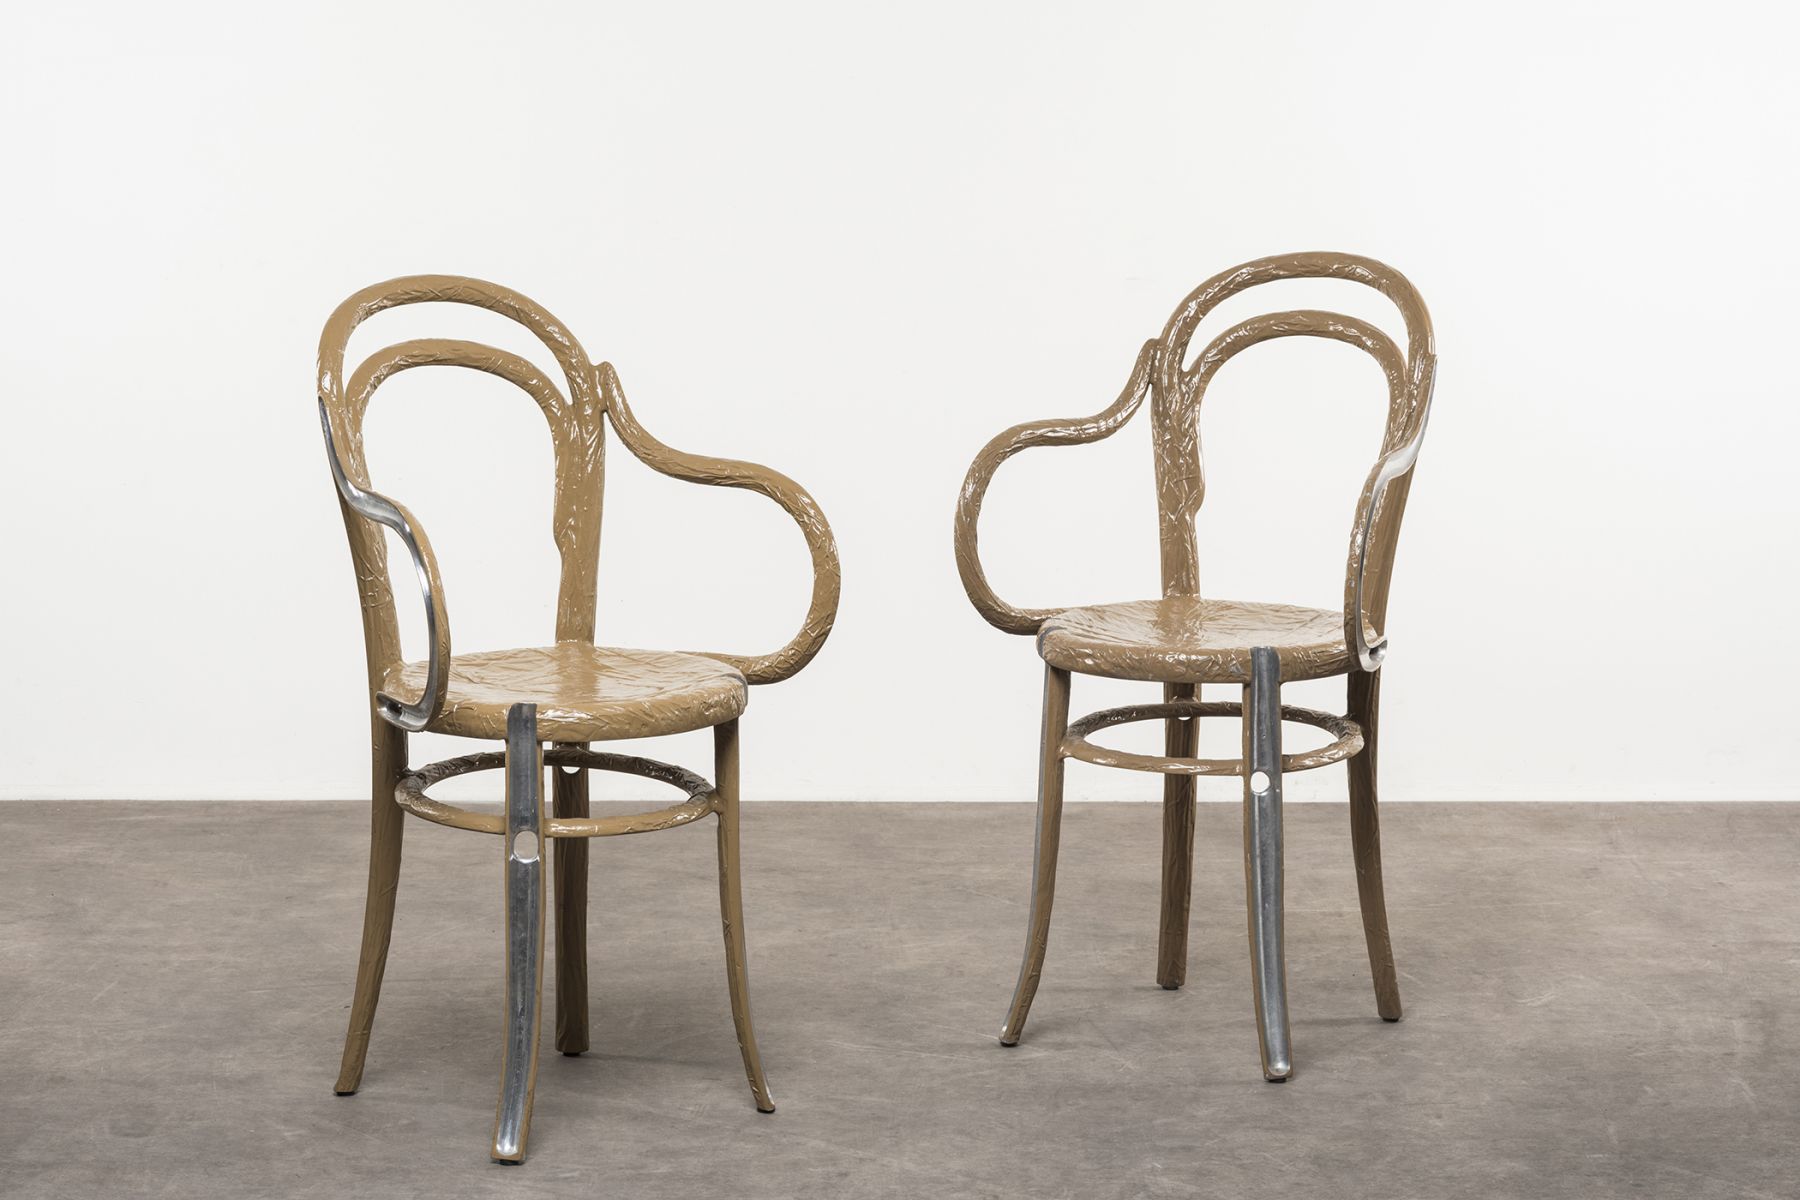 'Re-Thonet 14' chairs with arms Andrea Salvetti pic-6